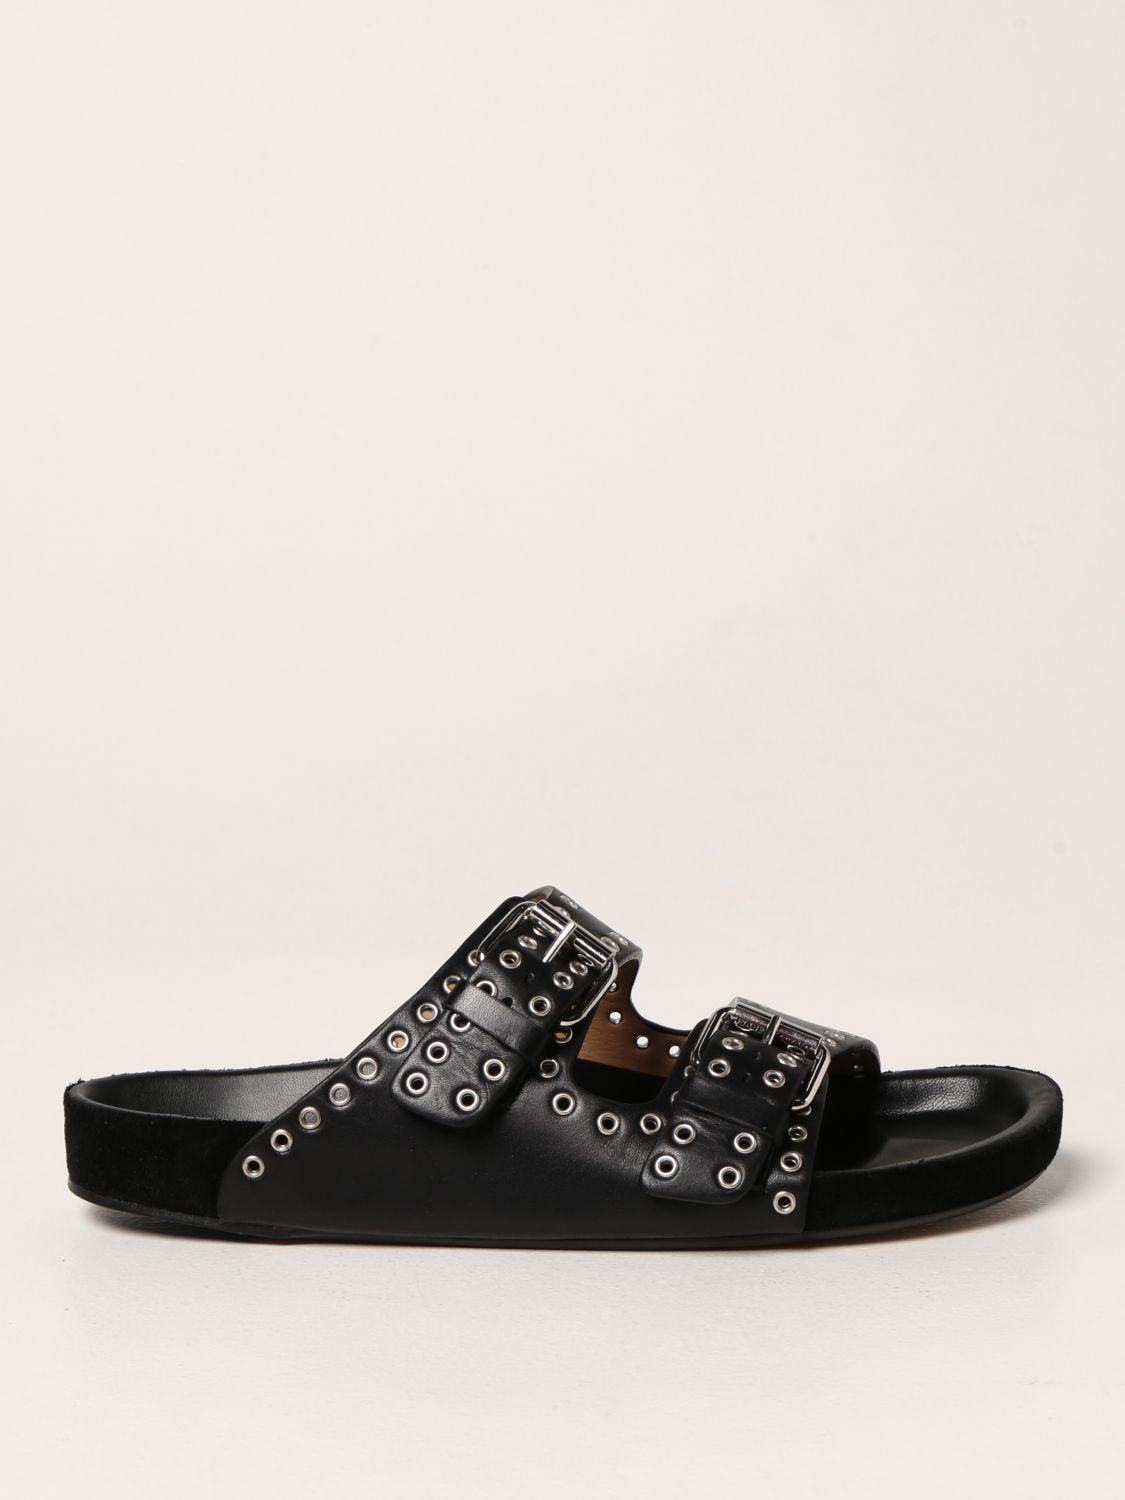 ISABEL MARANT ETOILE: Lennyo Isabel flat sandals in leather Black | Isabel Marant Etoile flat sandals SD046222P032S online at GIGLIO.COM